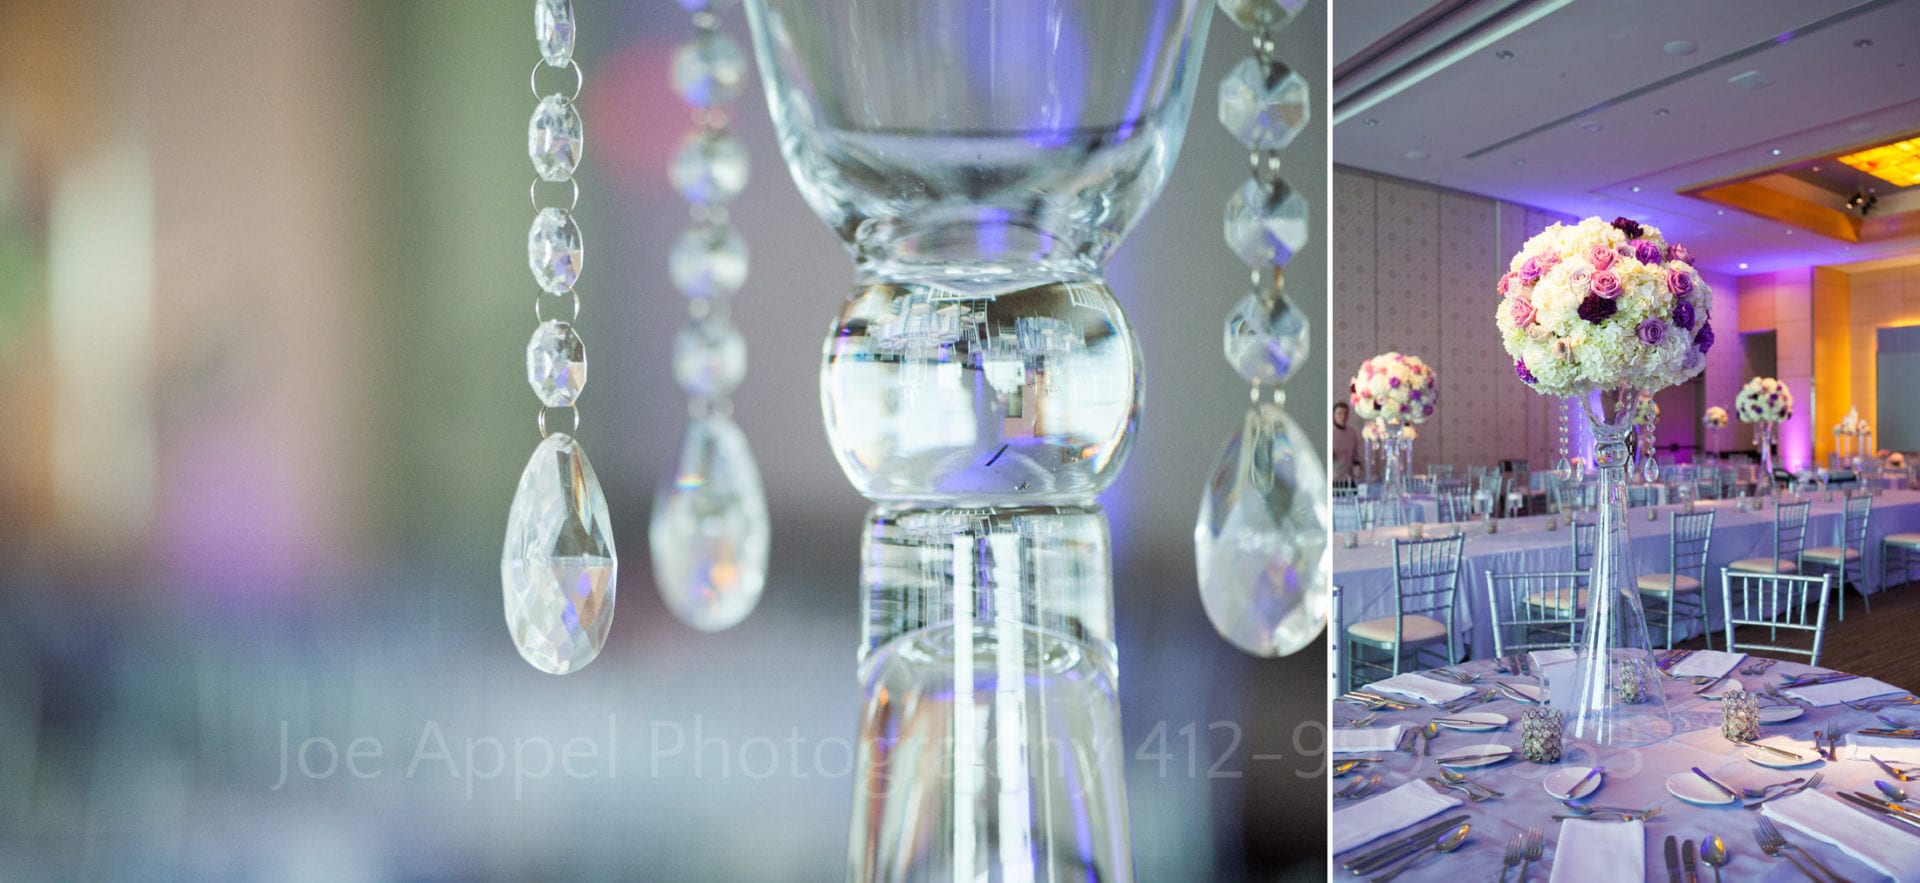 Fairmont Hotel Pittsburgh Weddings crystals on a vase and a photo of large bouquets in tall skinny crystal vases